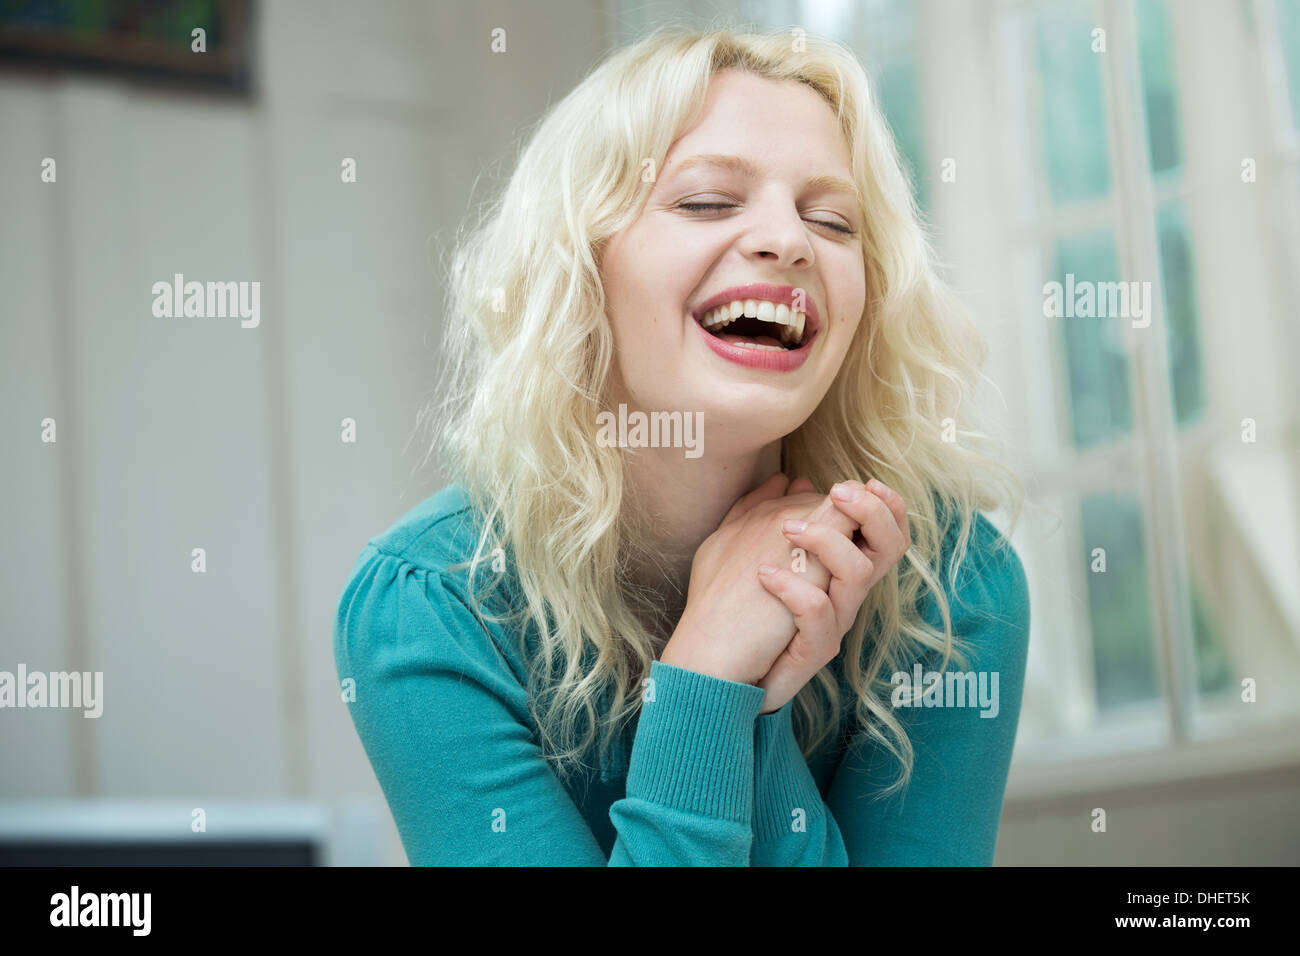 Happy young woman with eyes closed and hands together Stock Photo